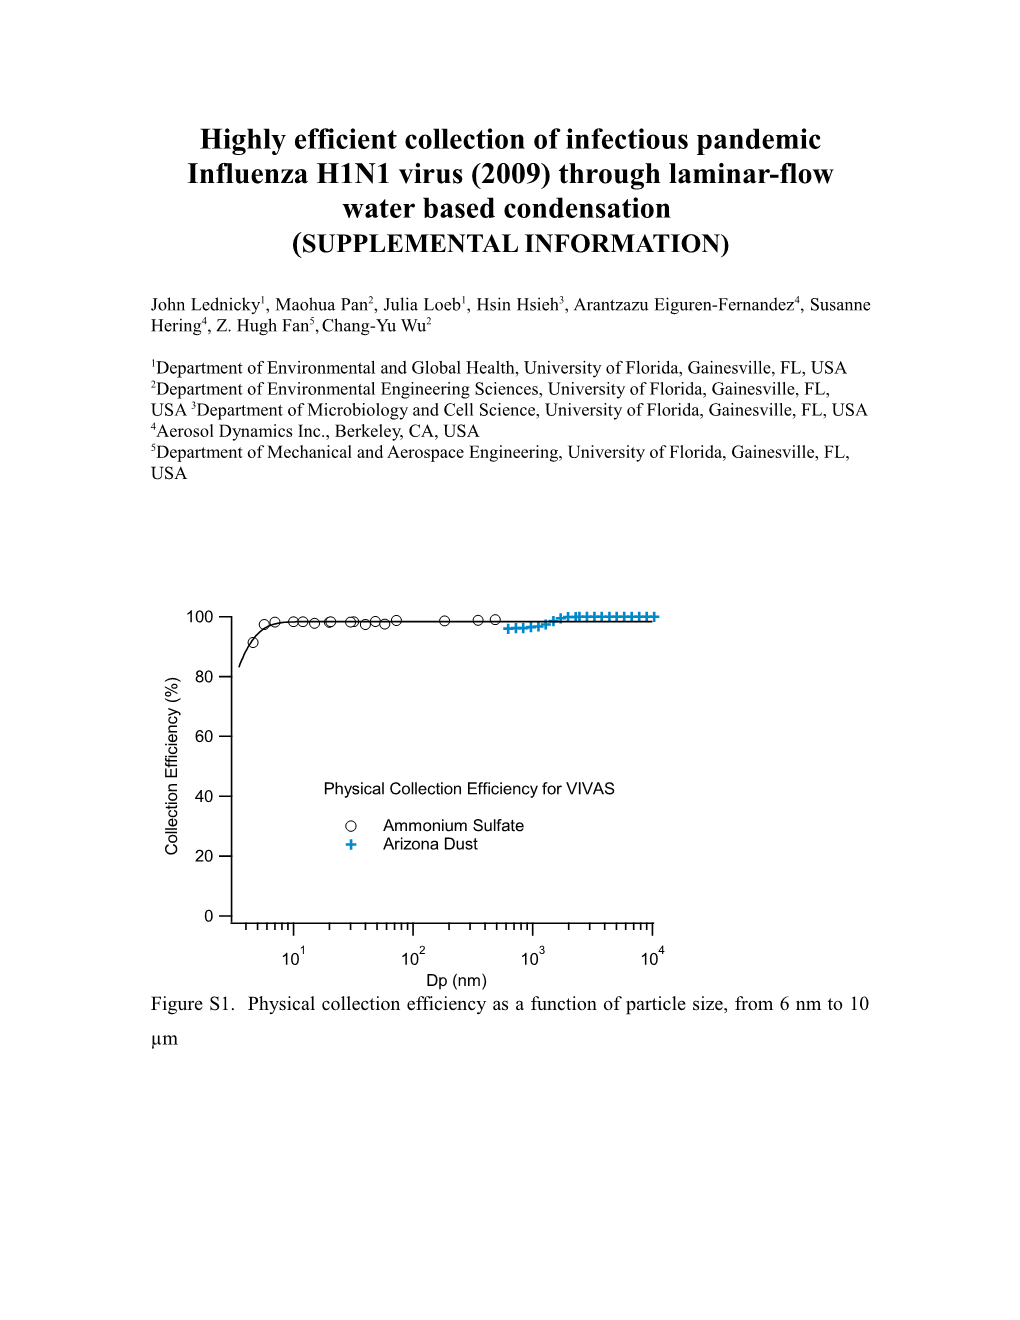 Highly Efficient Collection of Infectious Pandemic Influenza H1N1 Virus (2009) Through